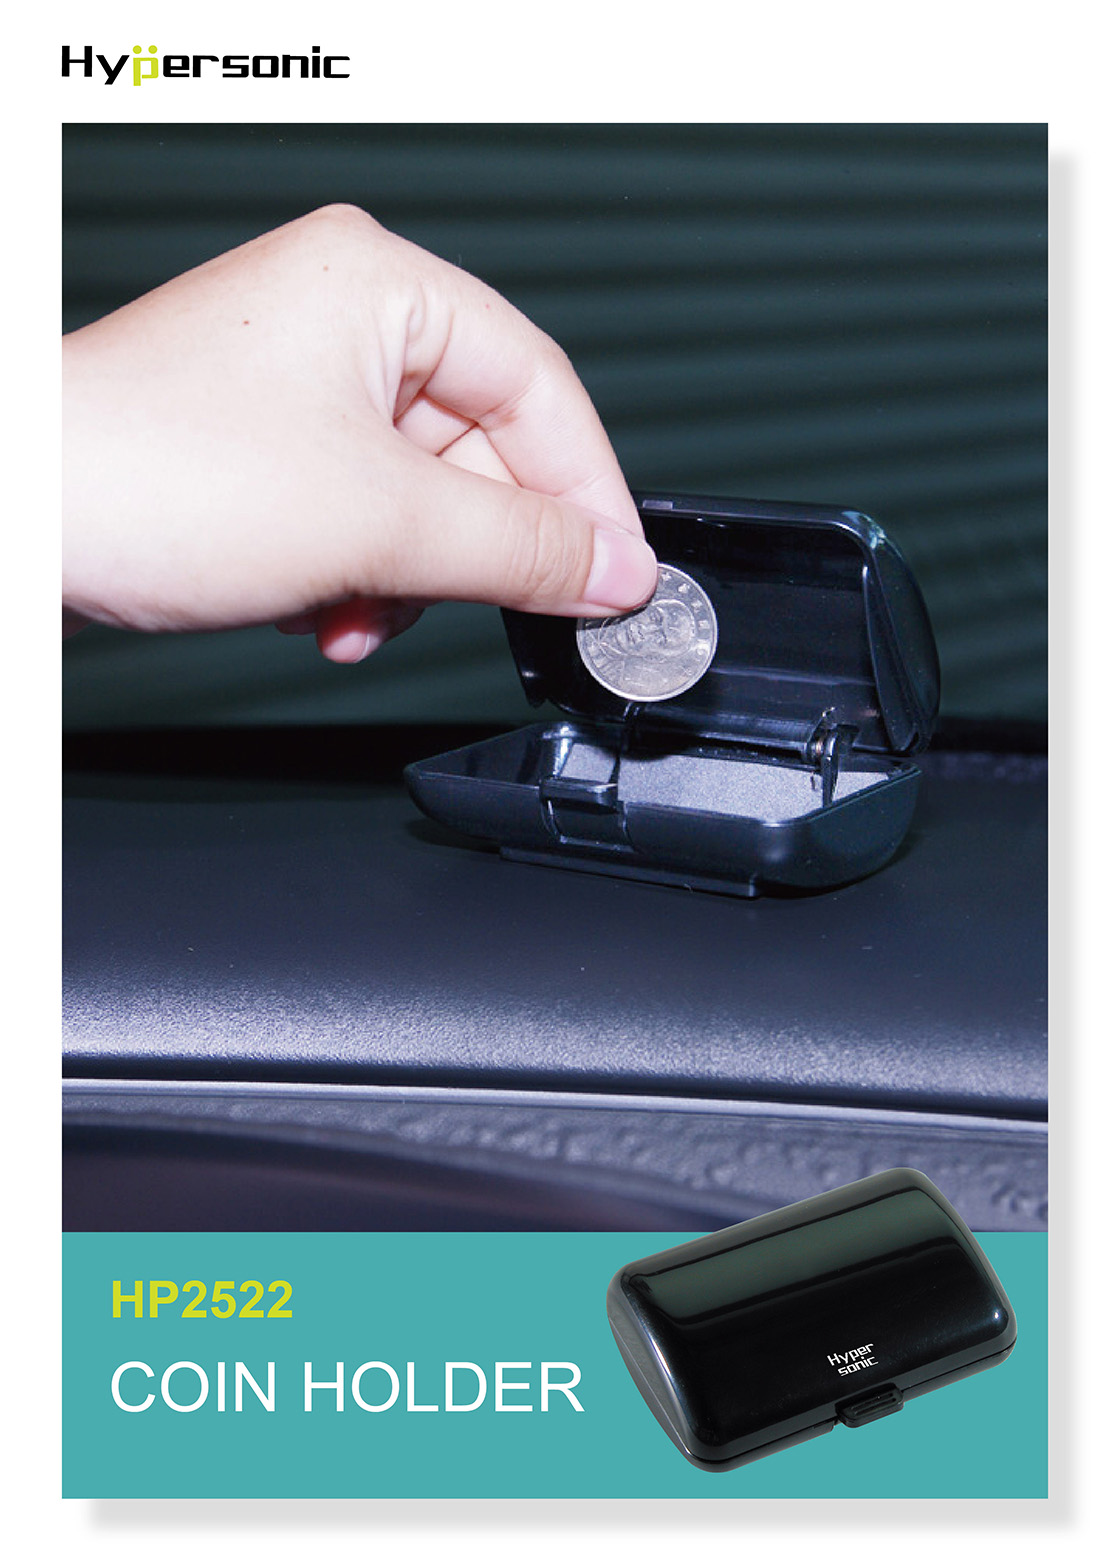 Hypersonic Car Coin Holder HP2522